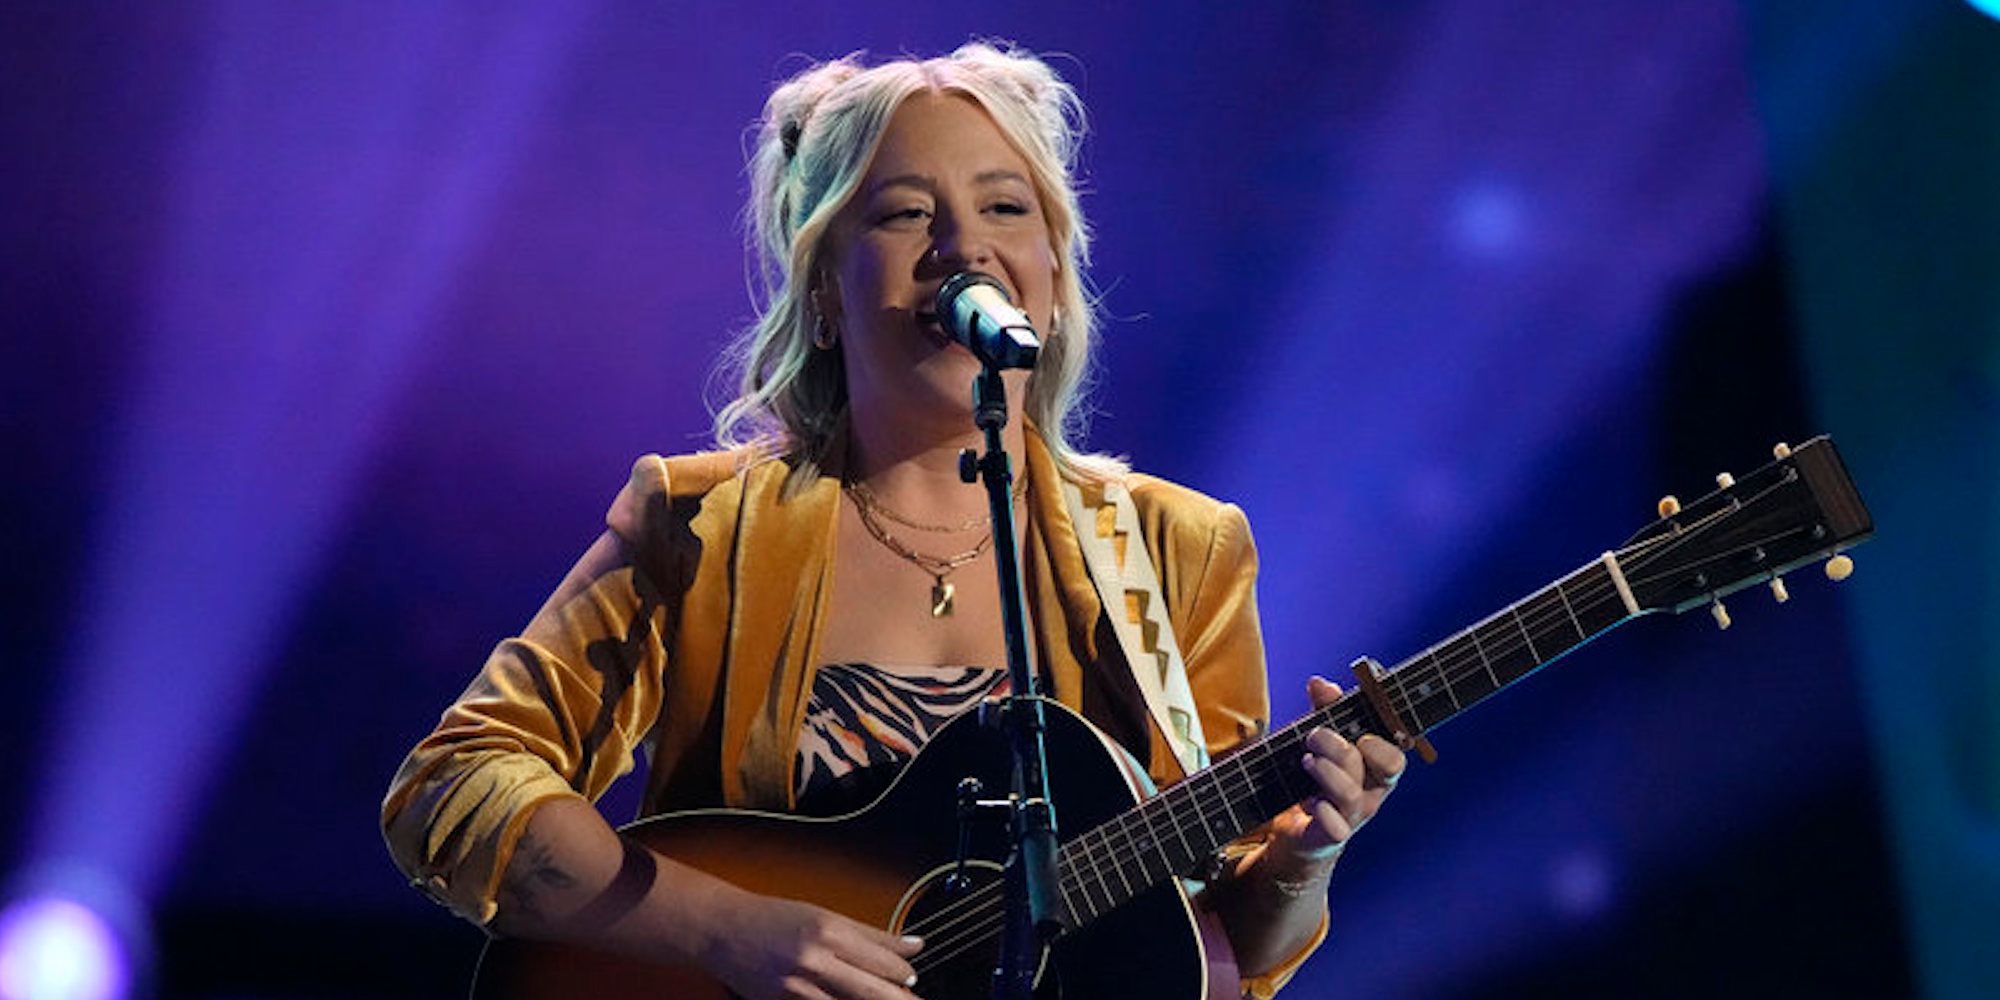 Dani Stacy performs with her guitar auditioning on 'The Voice'